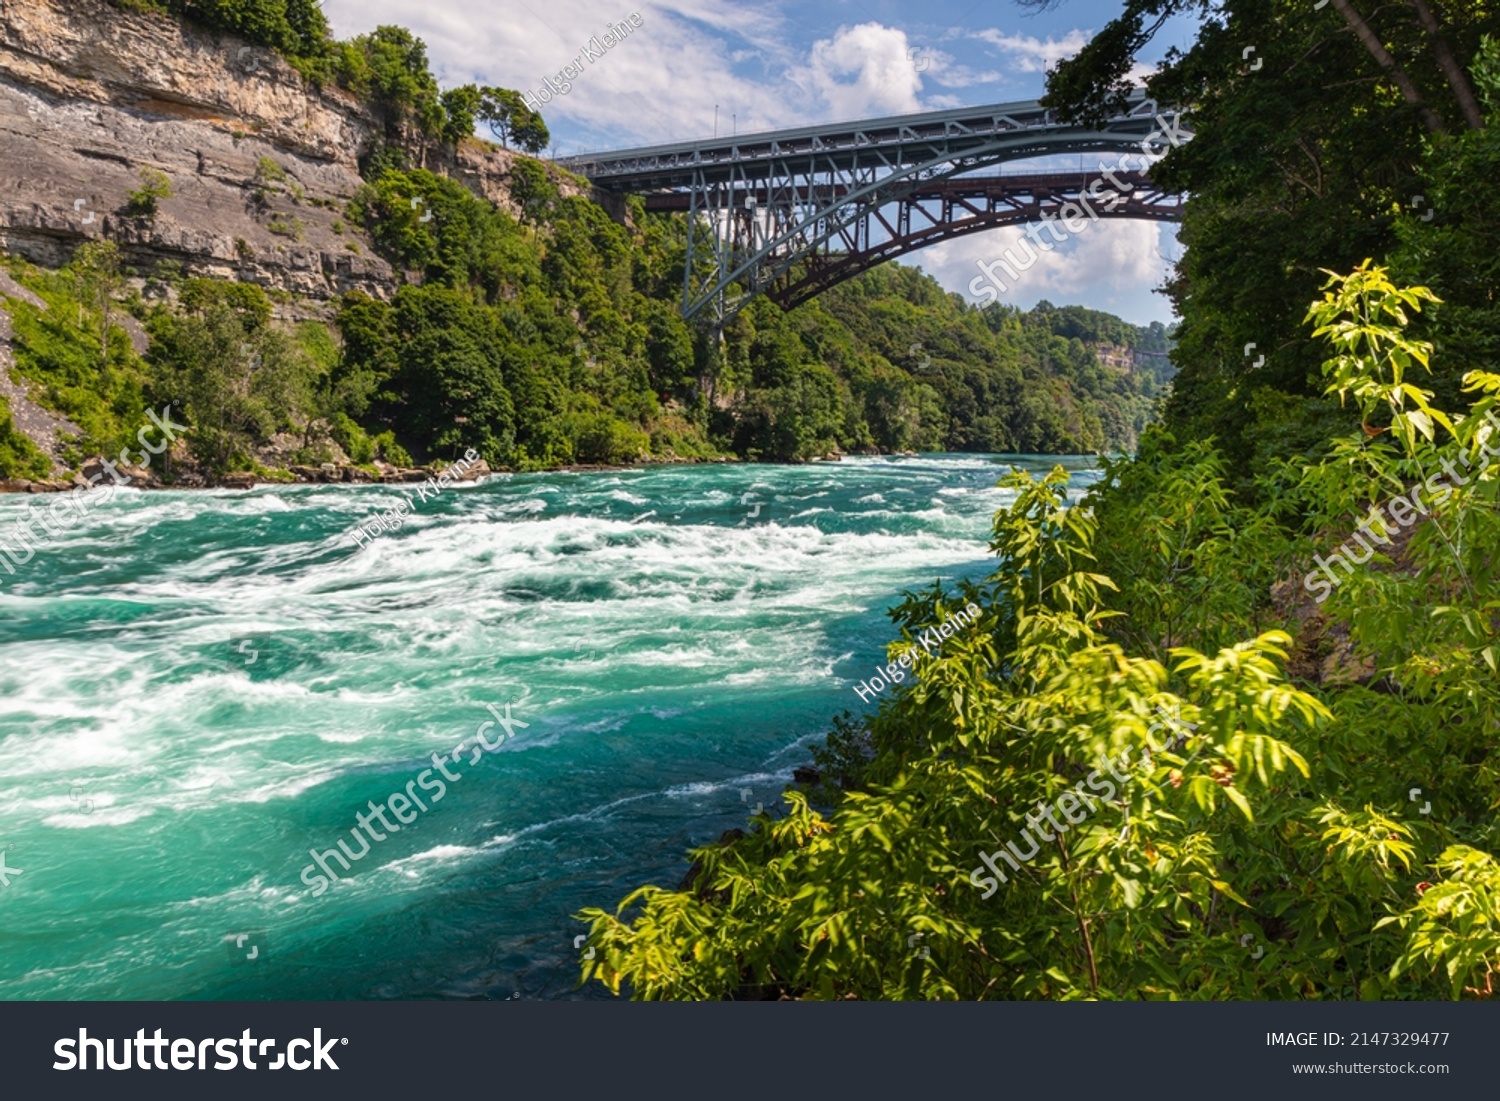 Rapids in the Niagara River near the so called whirlpool at the nagar falls. The river winds through the high gorges with immense speed. Niagara Falls is a must-see for tourists in Canada #2147329477